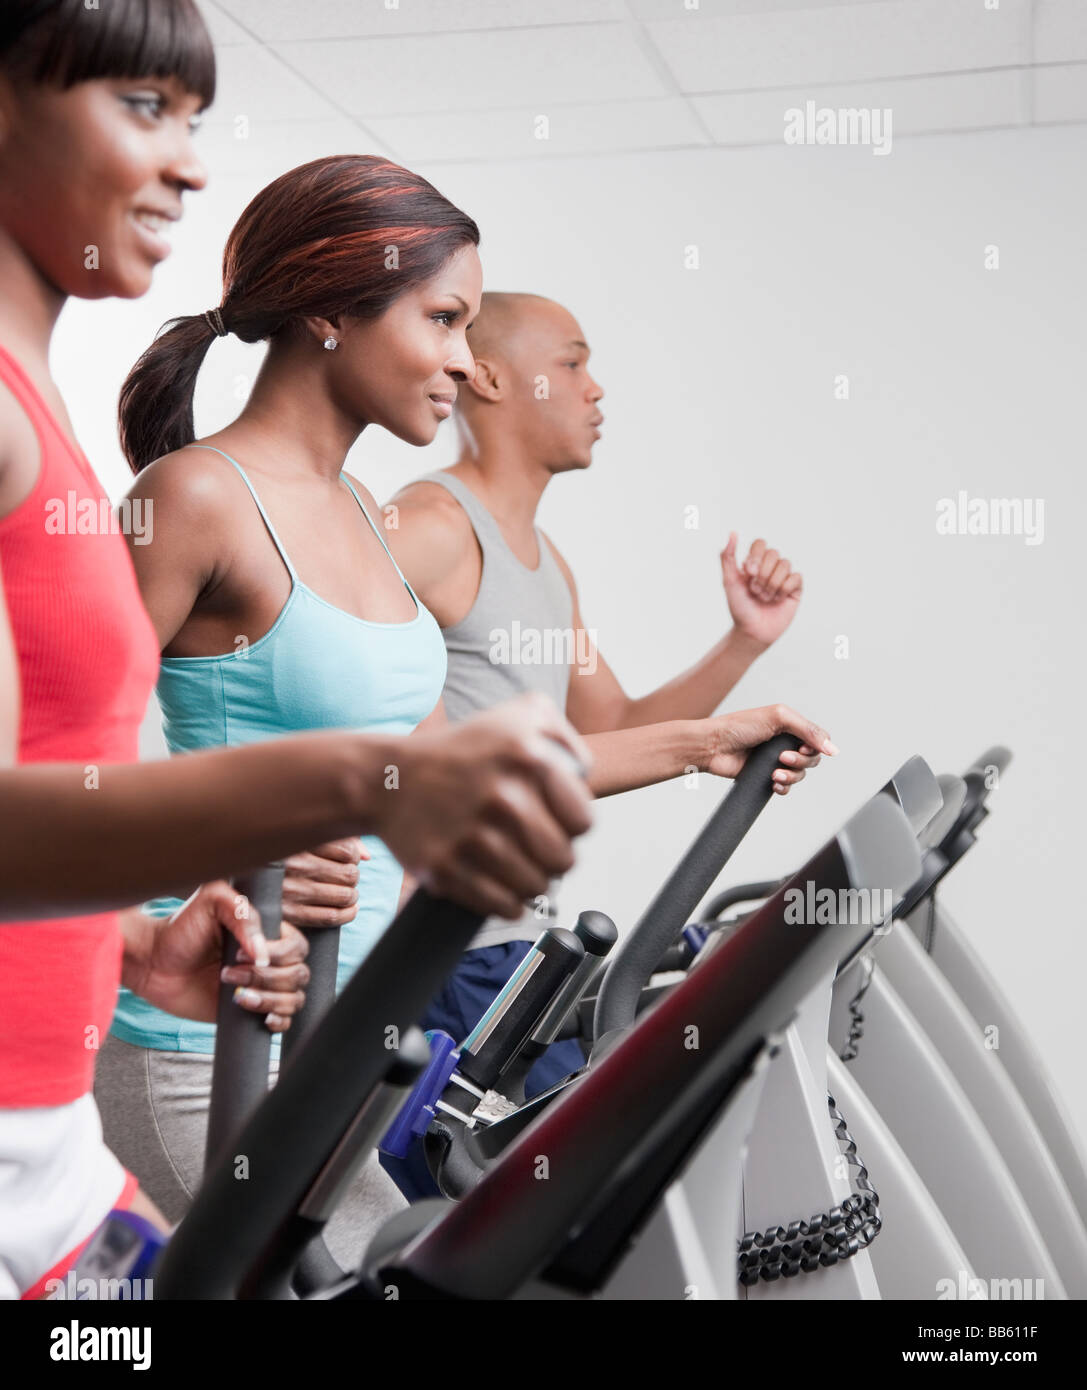 African people using exercise equipment in health club Stock Photo